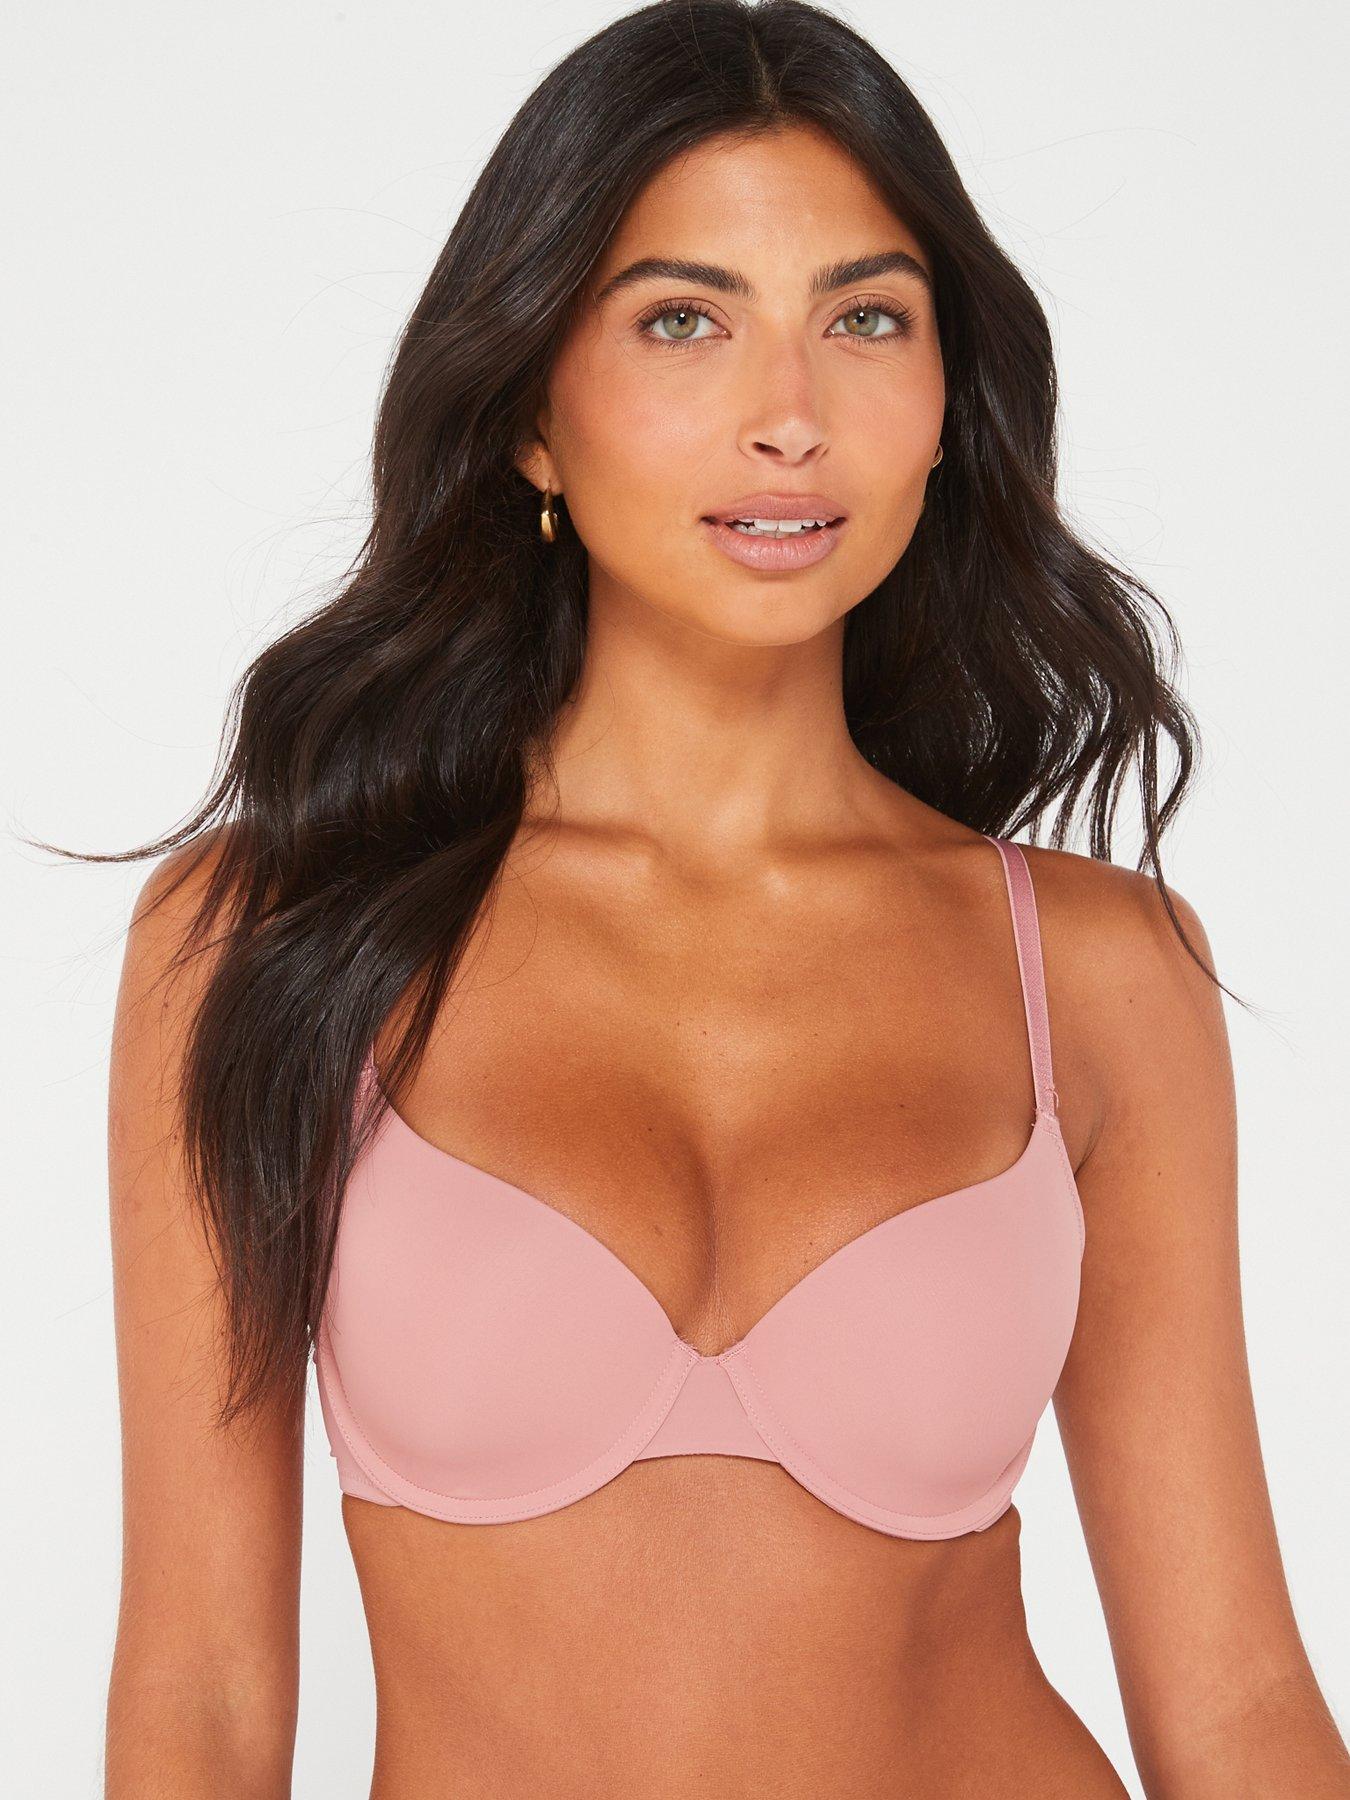 10 PINK Panties, $35! TREAT YOURSELF! - Victoria's Secret Email Archive